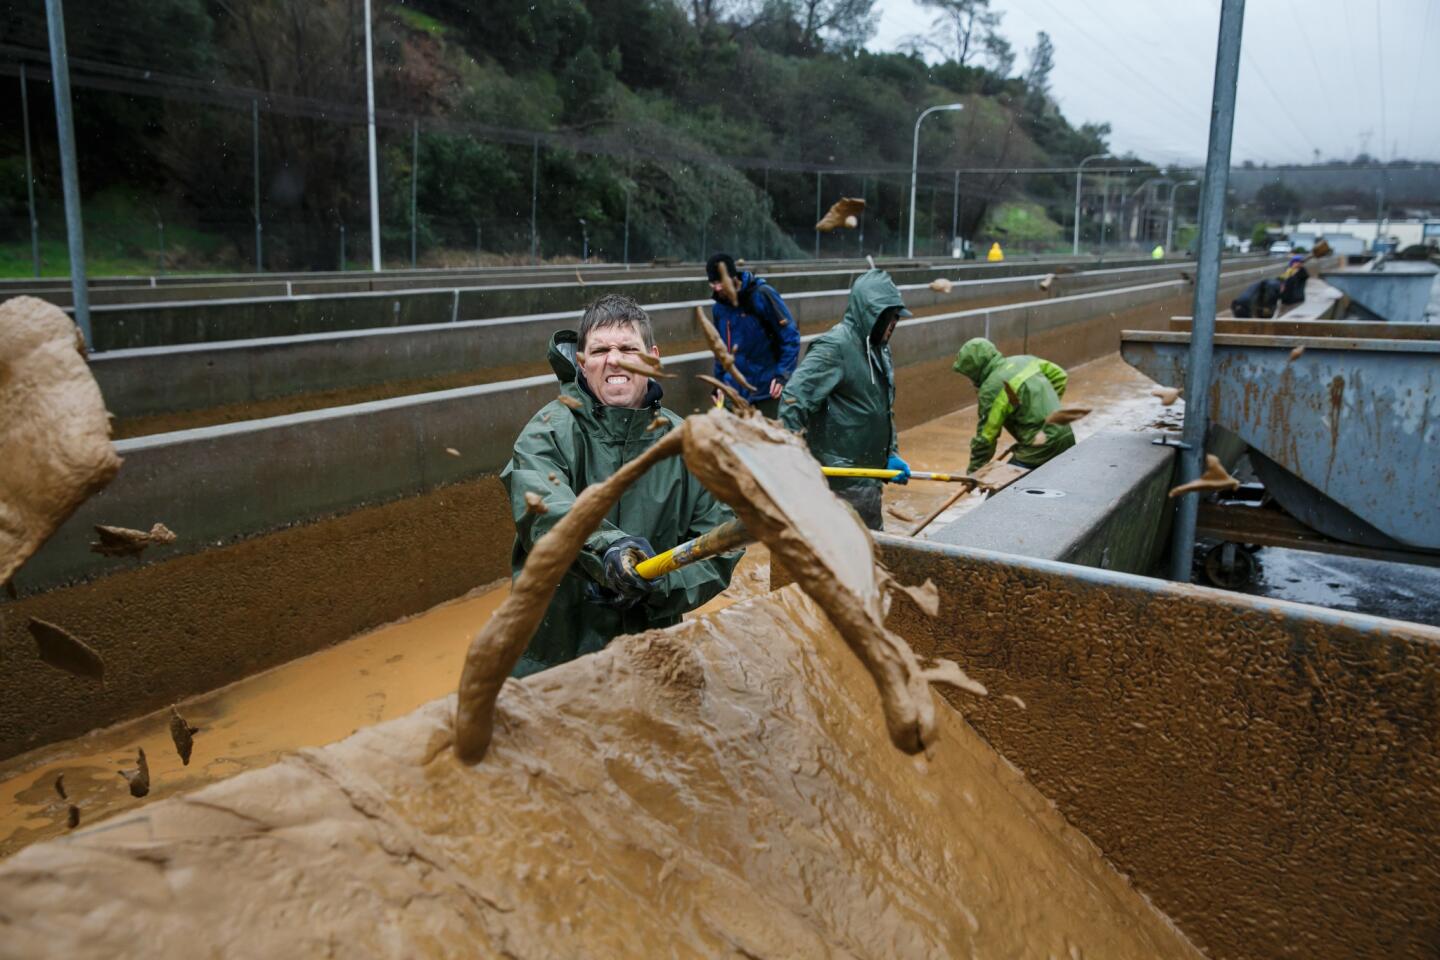 Kevin Anfinson and other volunteers help shovel the muddy sediment that has built up in the salmon raceway at the Feather River Fish Hatchery in Oroville.